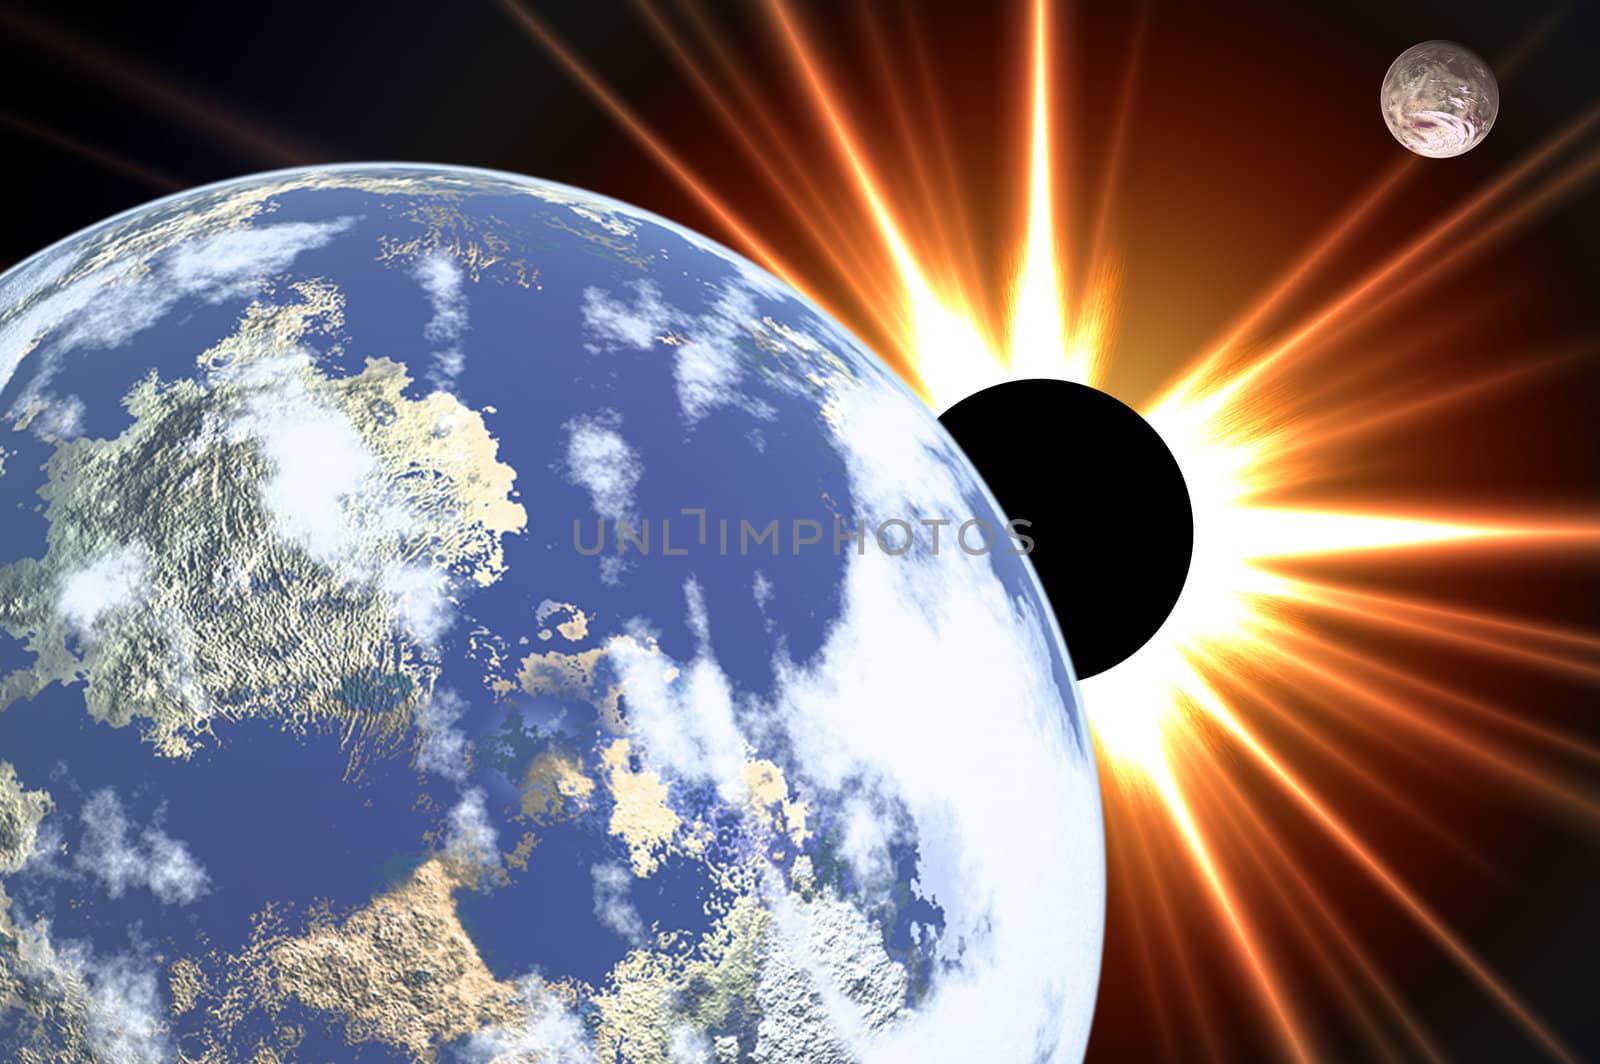 The Earth. Planets and solar eclipse in cosmos